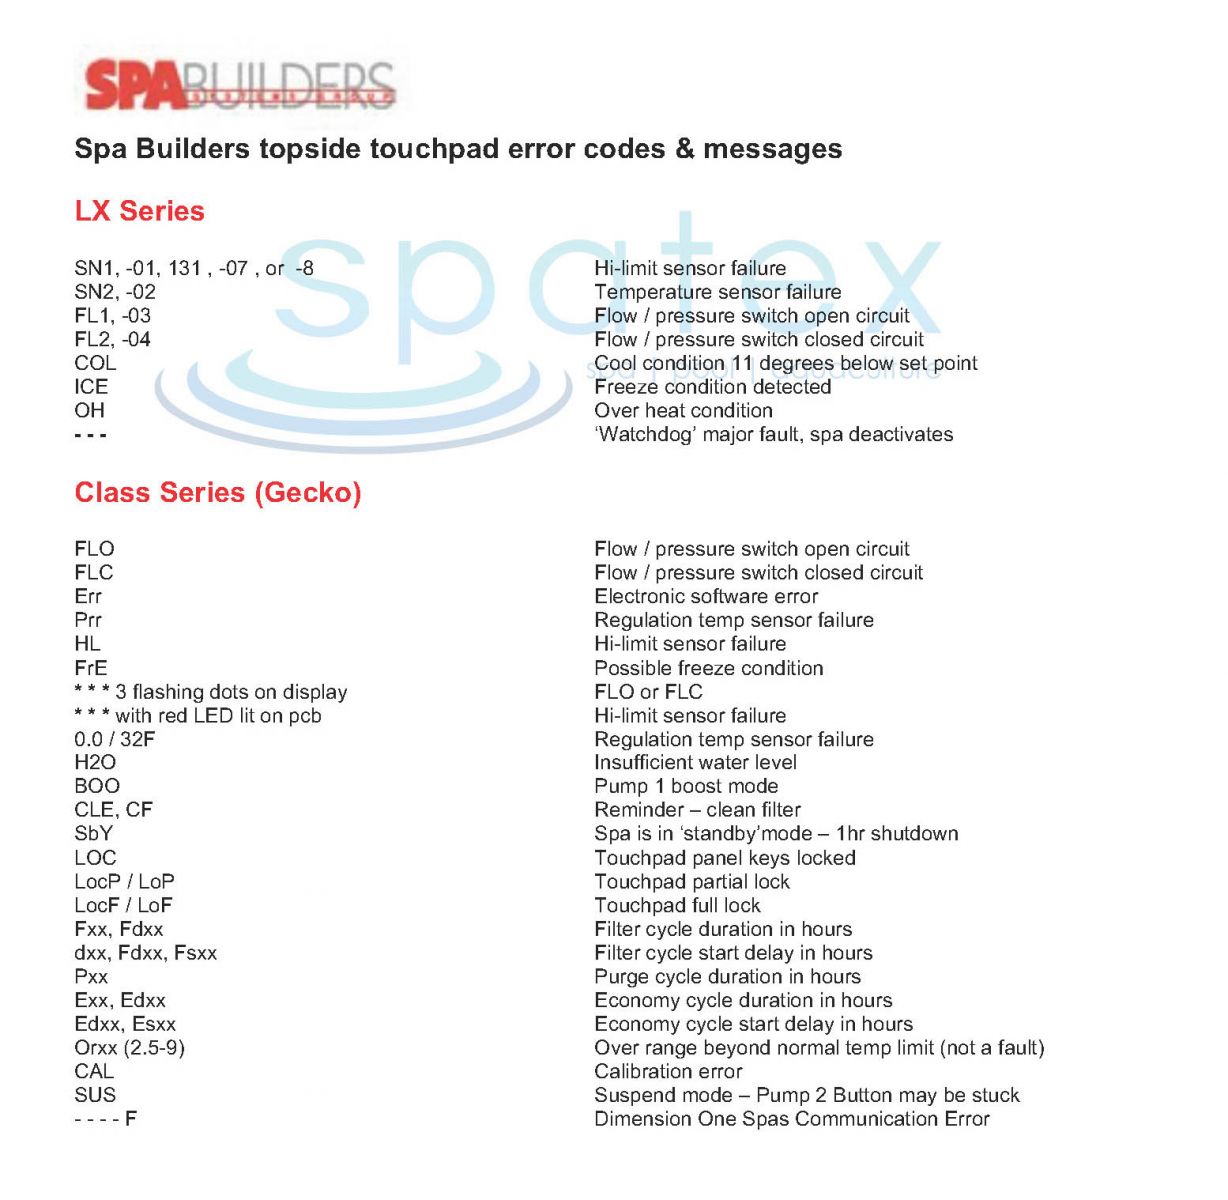 Spa Builders hot tub topside touchpad fault codes and error messages